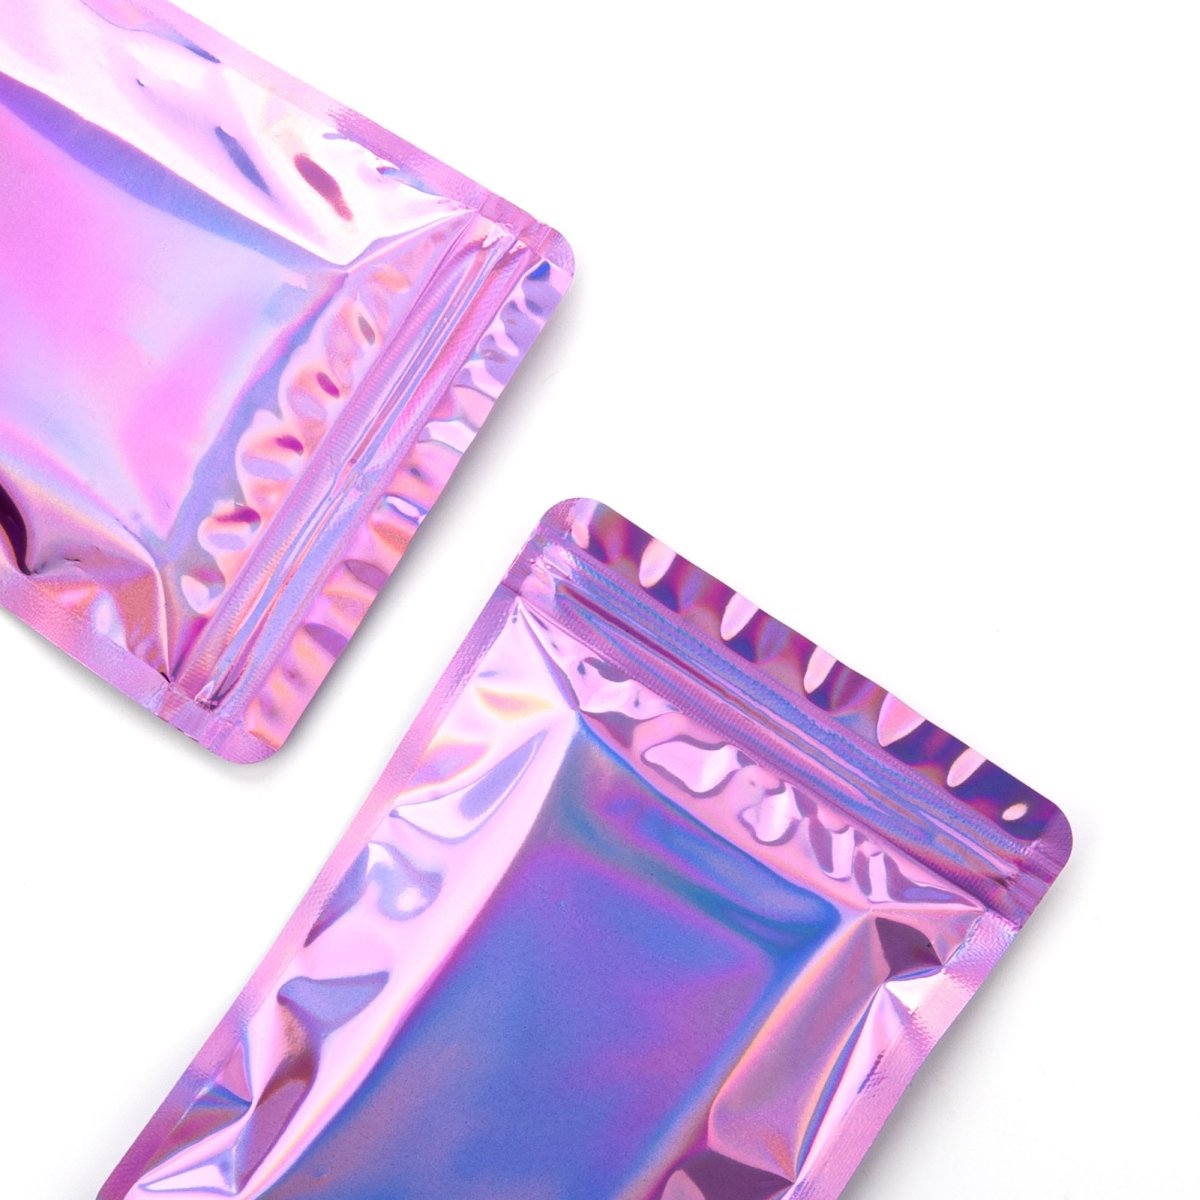 Clear and Half Gemstone Colored Mylar Flat Bags - Katady packaging